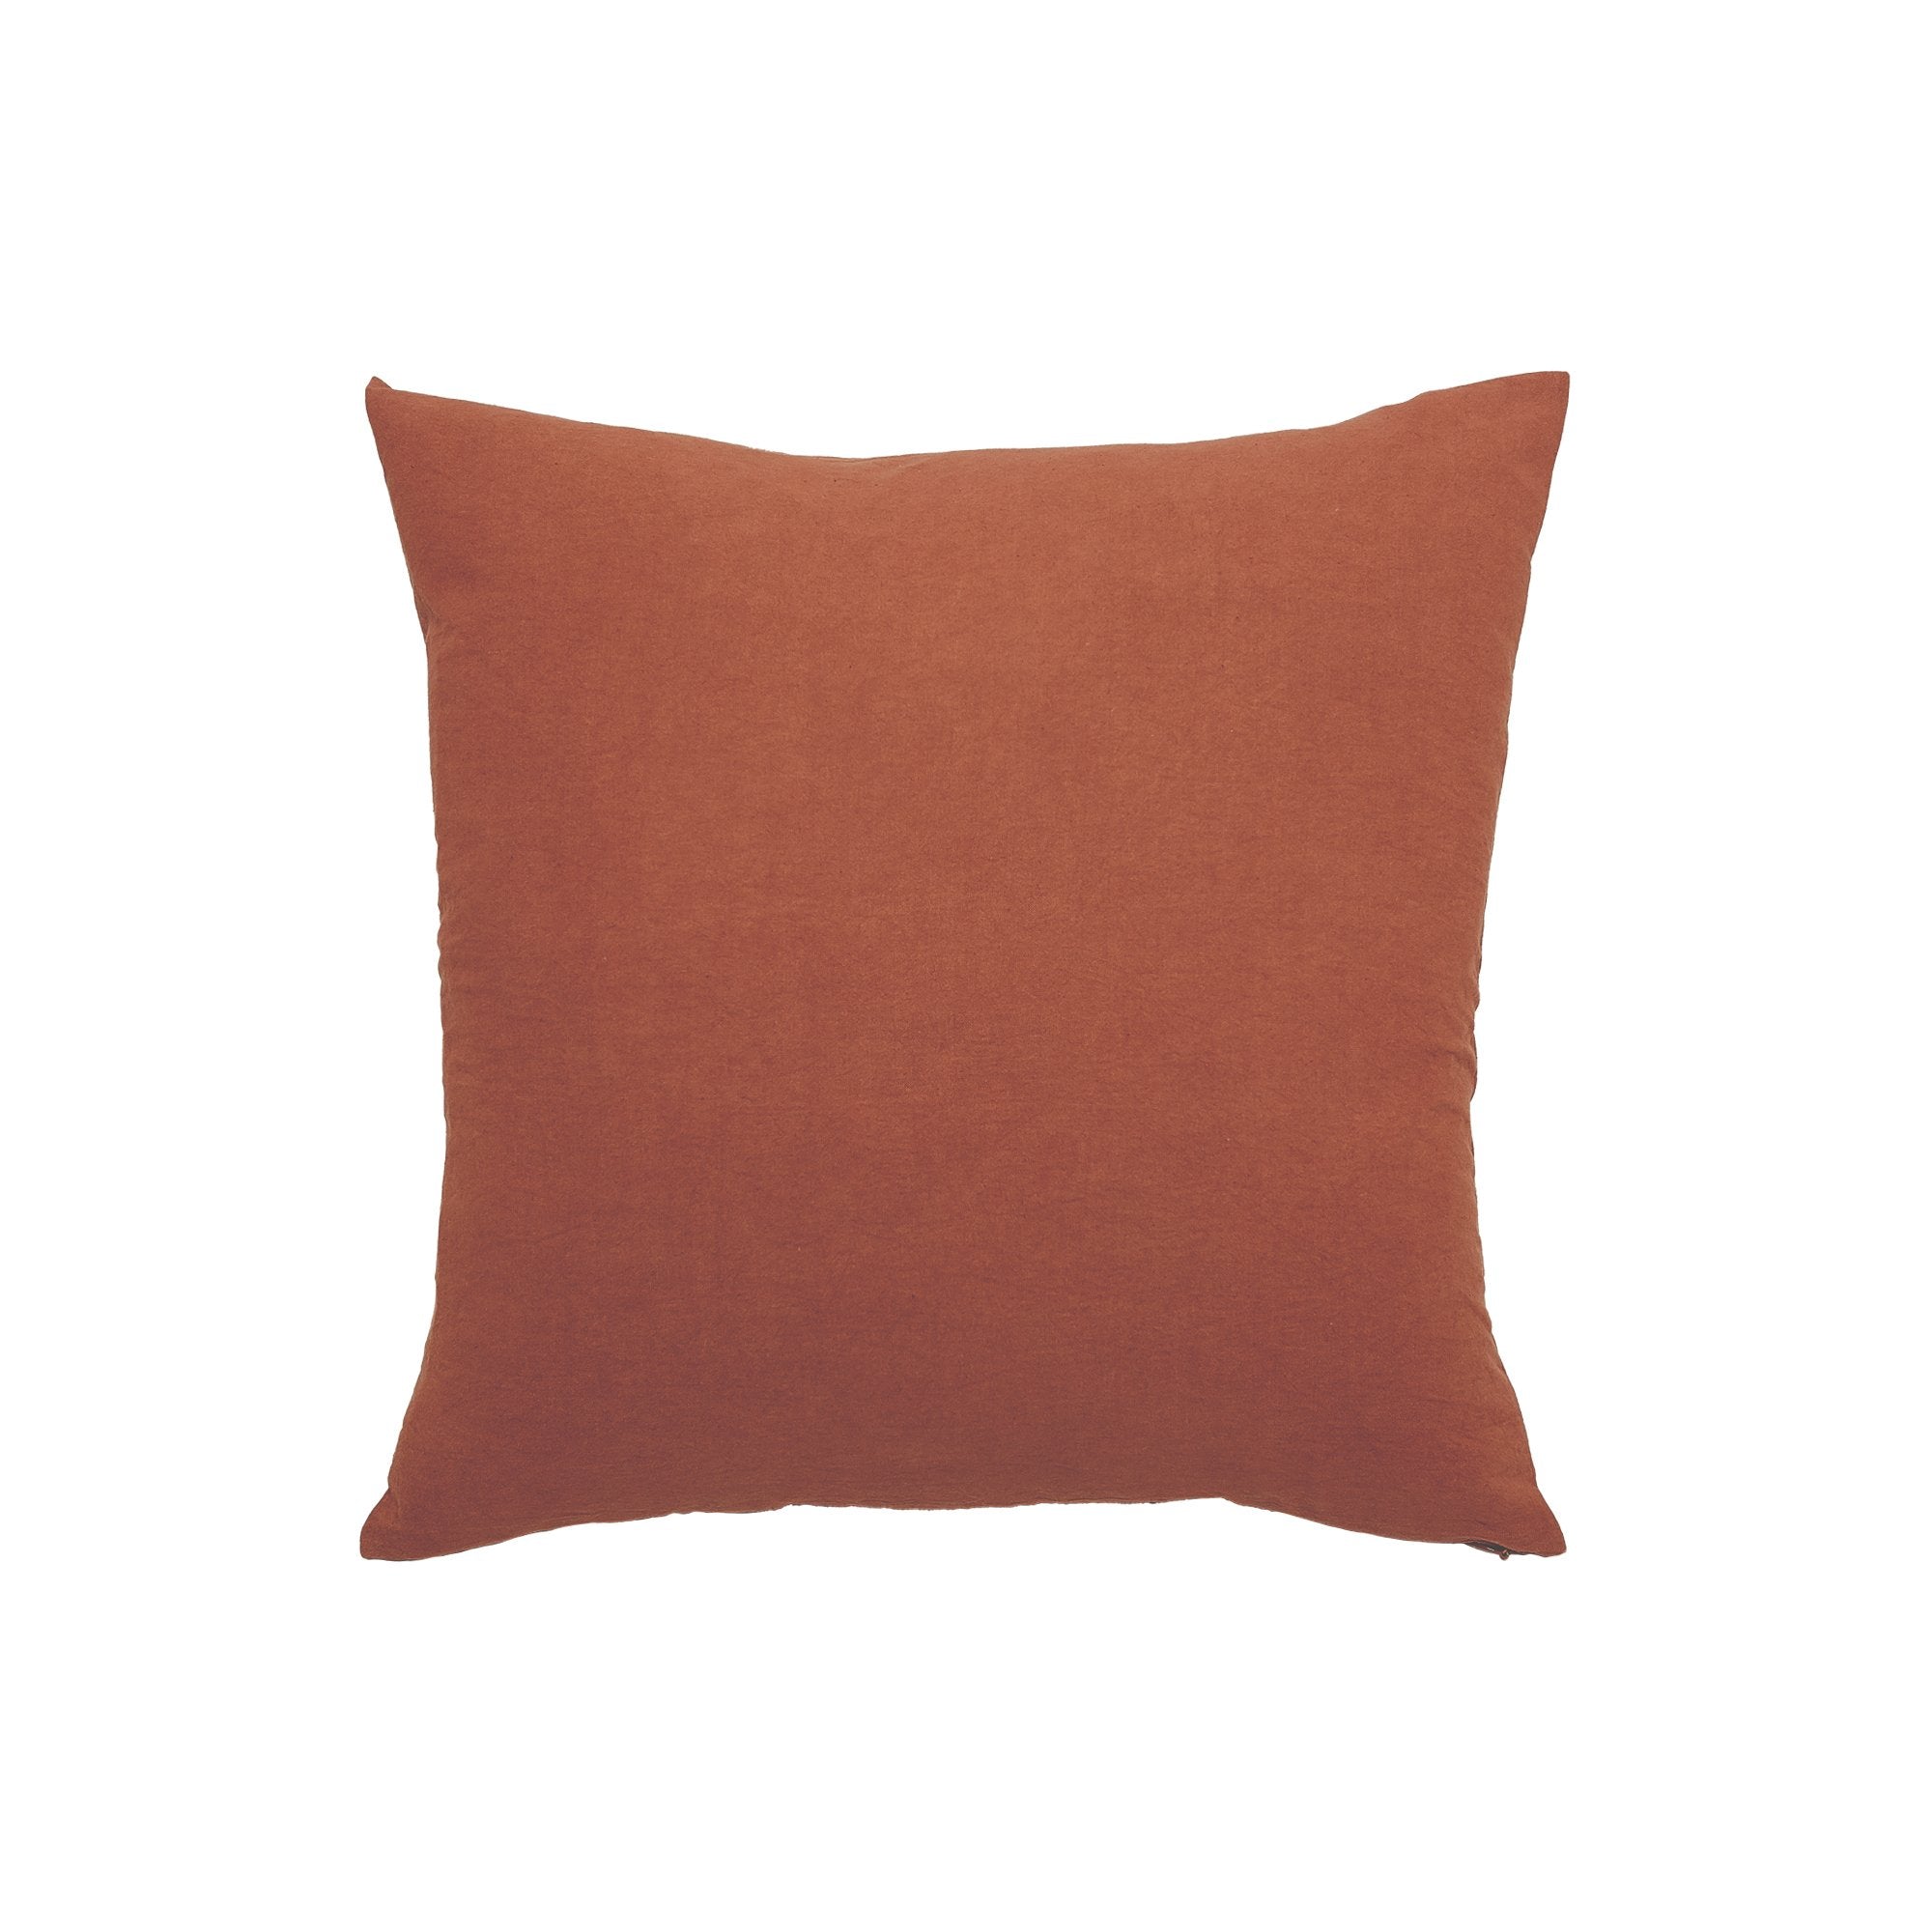 Japanese Mudcloth Pillow | Muted Red Home Textiles 